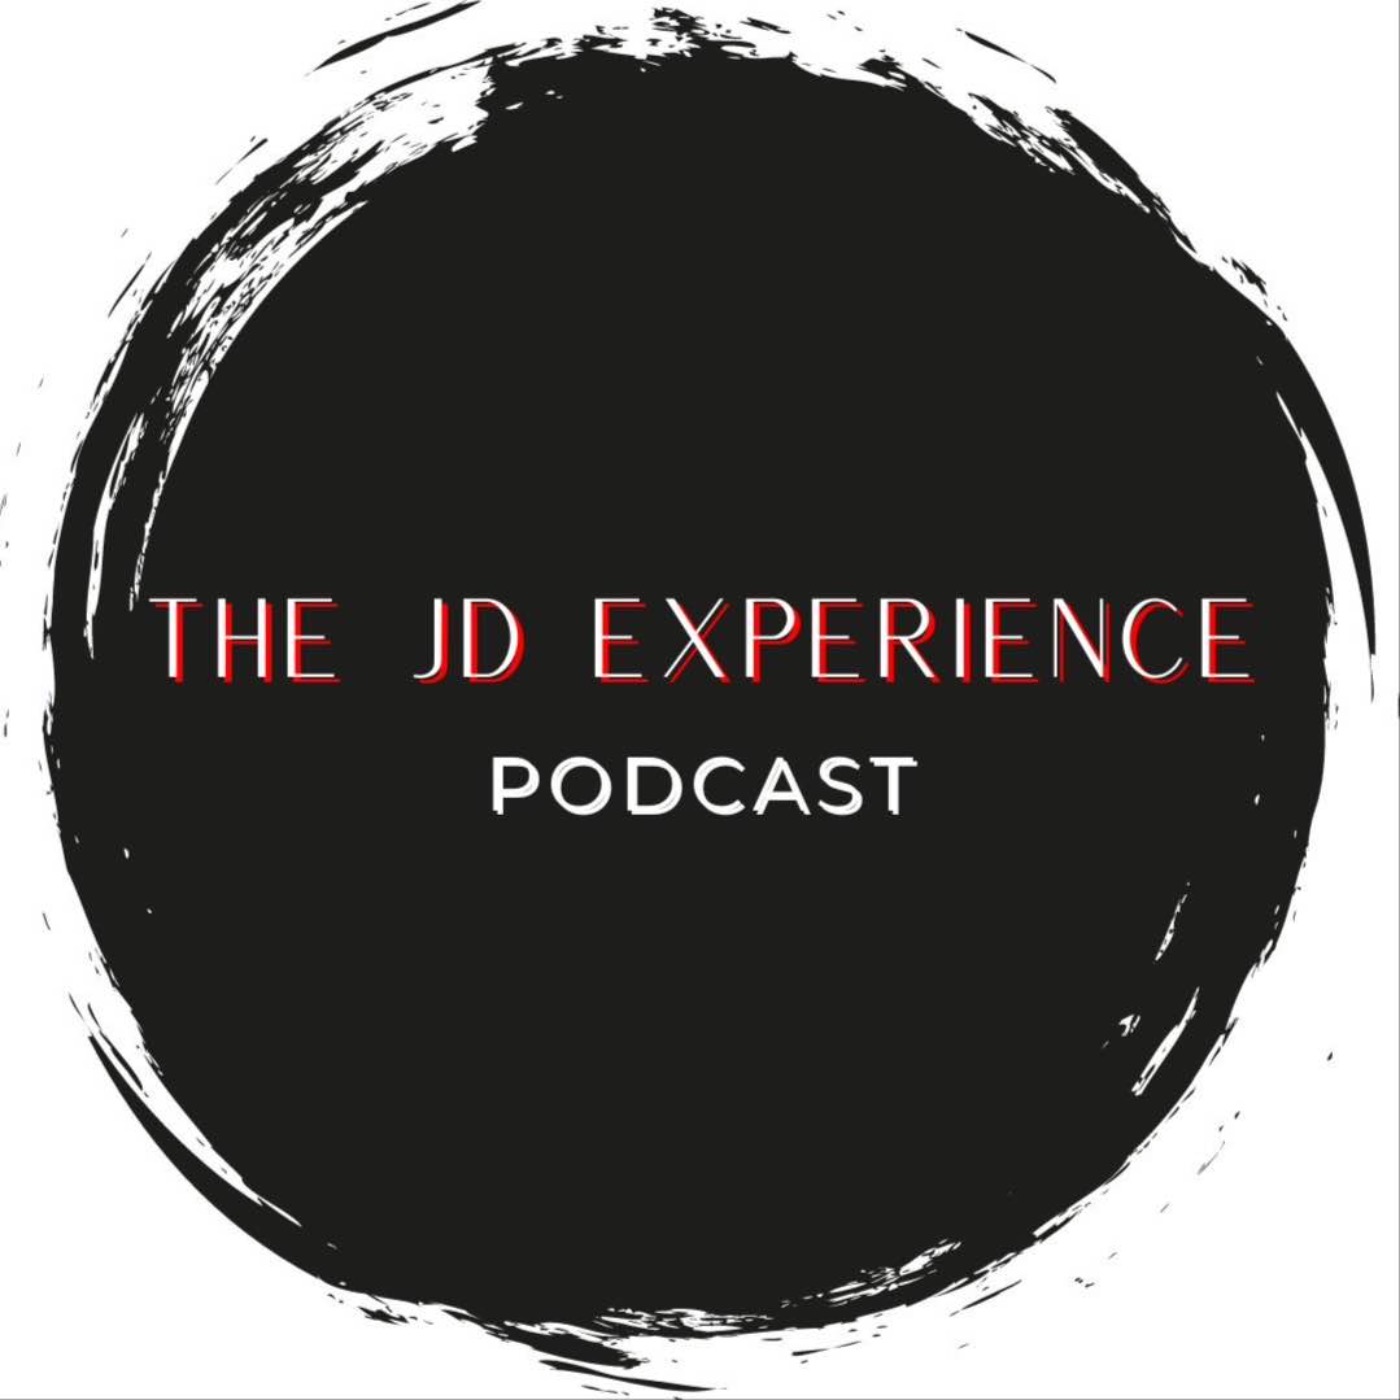 THE JD EXPERIENCE PODCAST EPISODE 9!